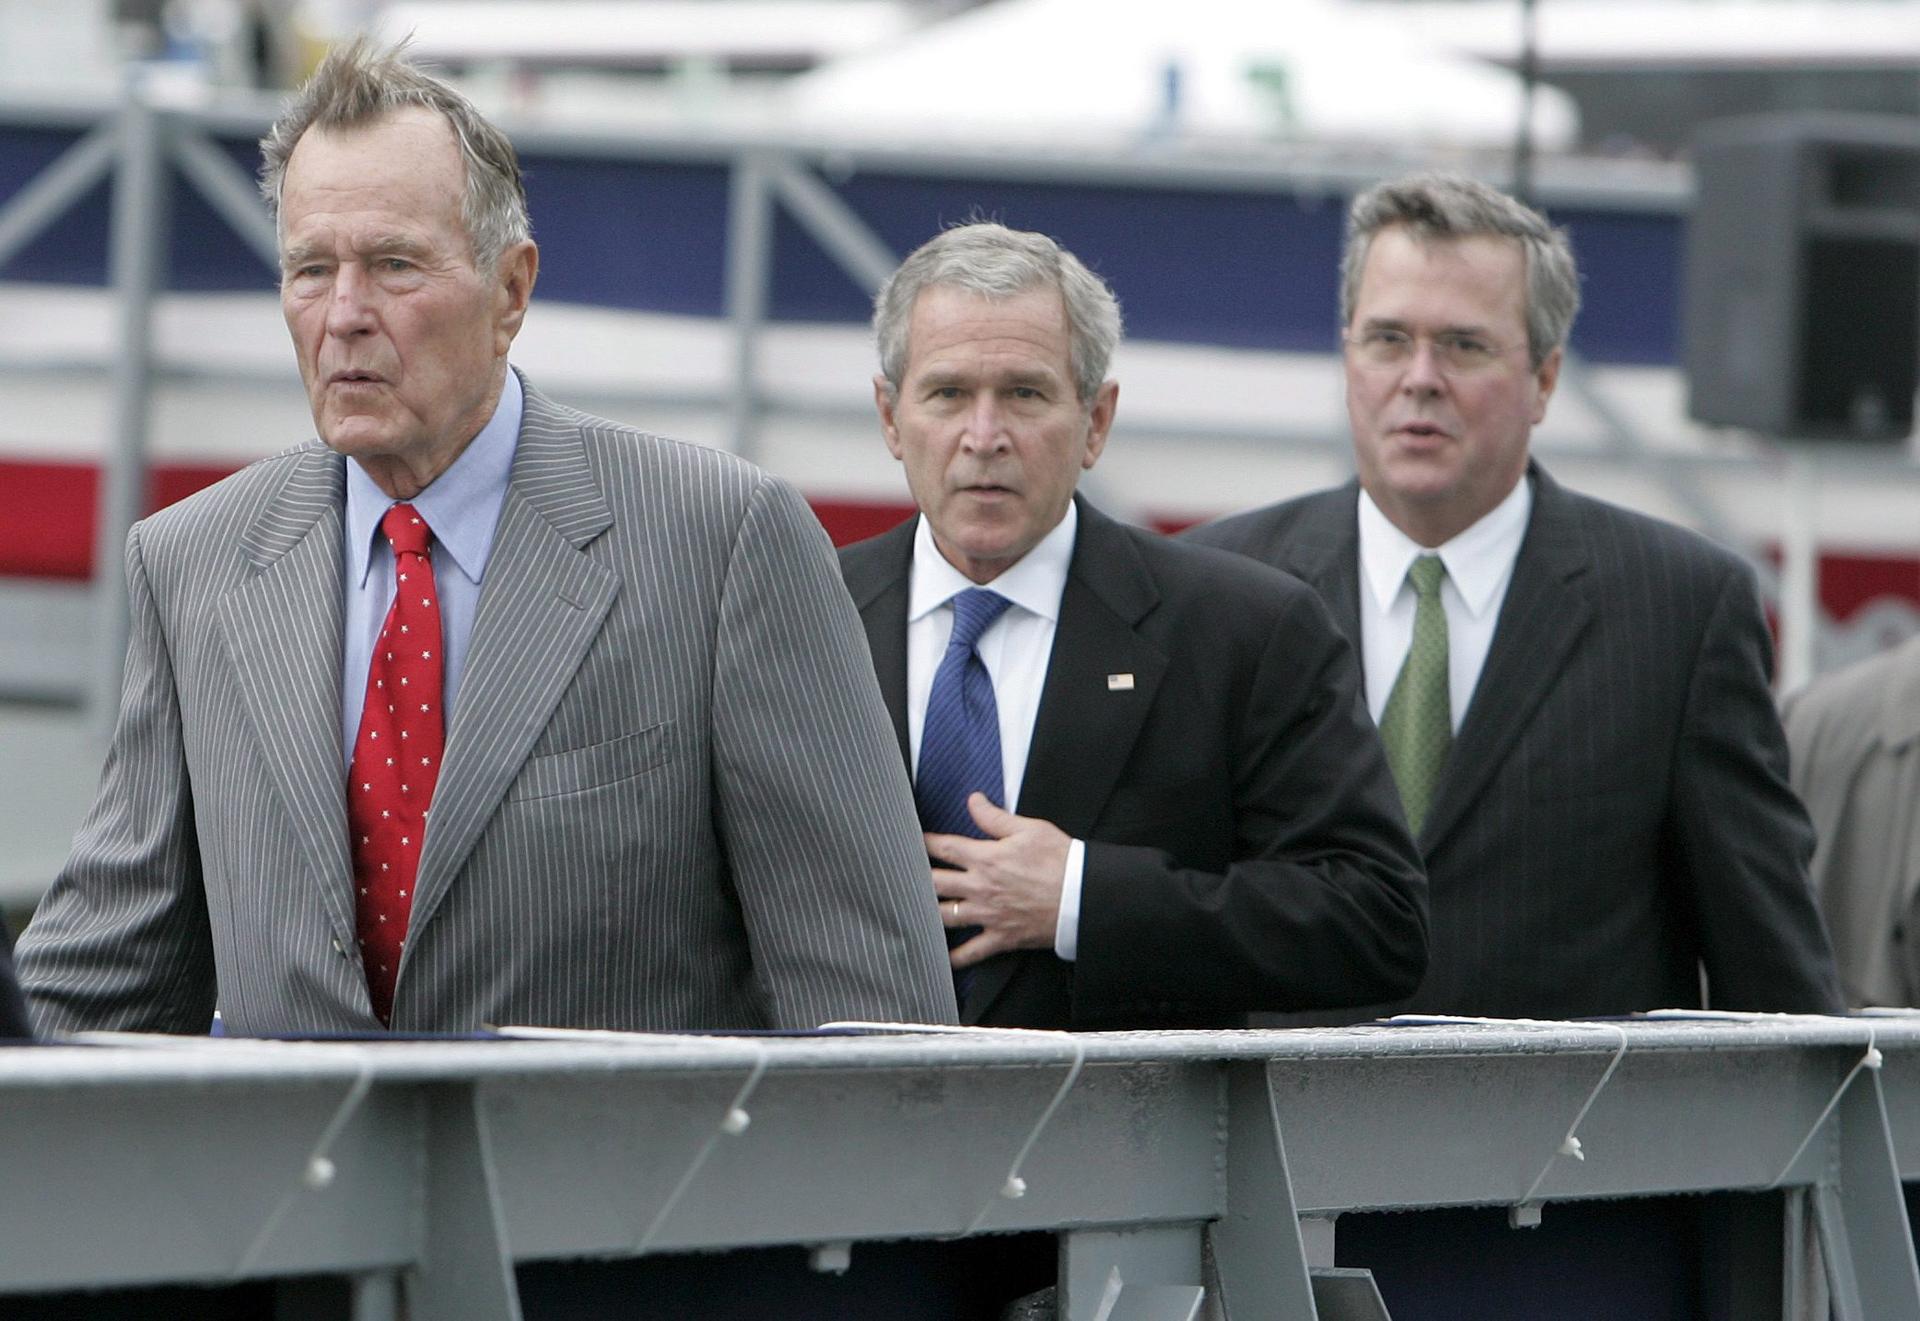 Jeb Bush (right) hopes to follow his father, George H.W. Bush, and brother George W. Bush into the White House. Photo: EPA